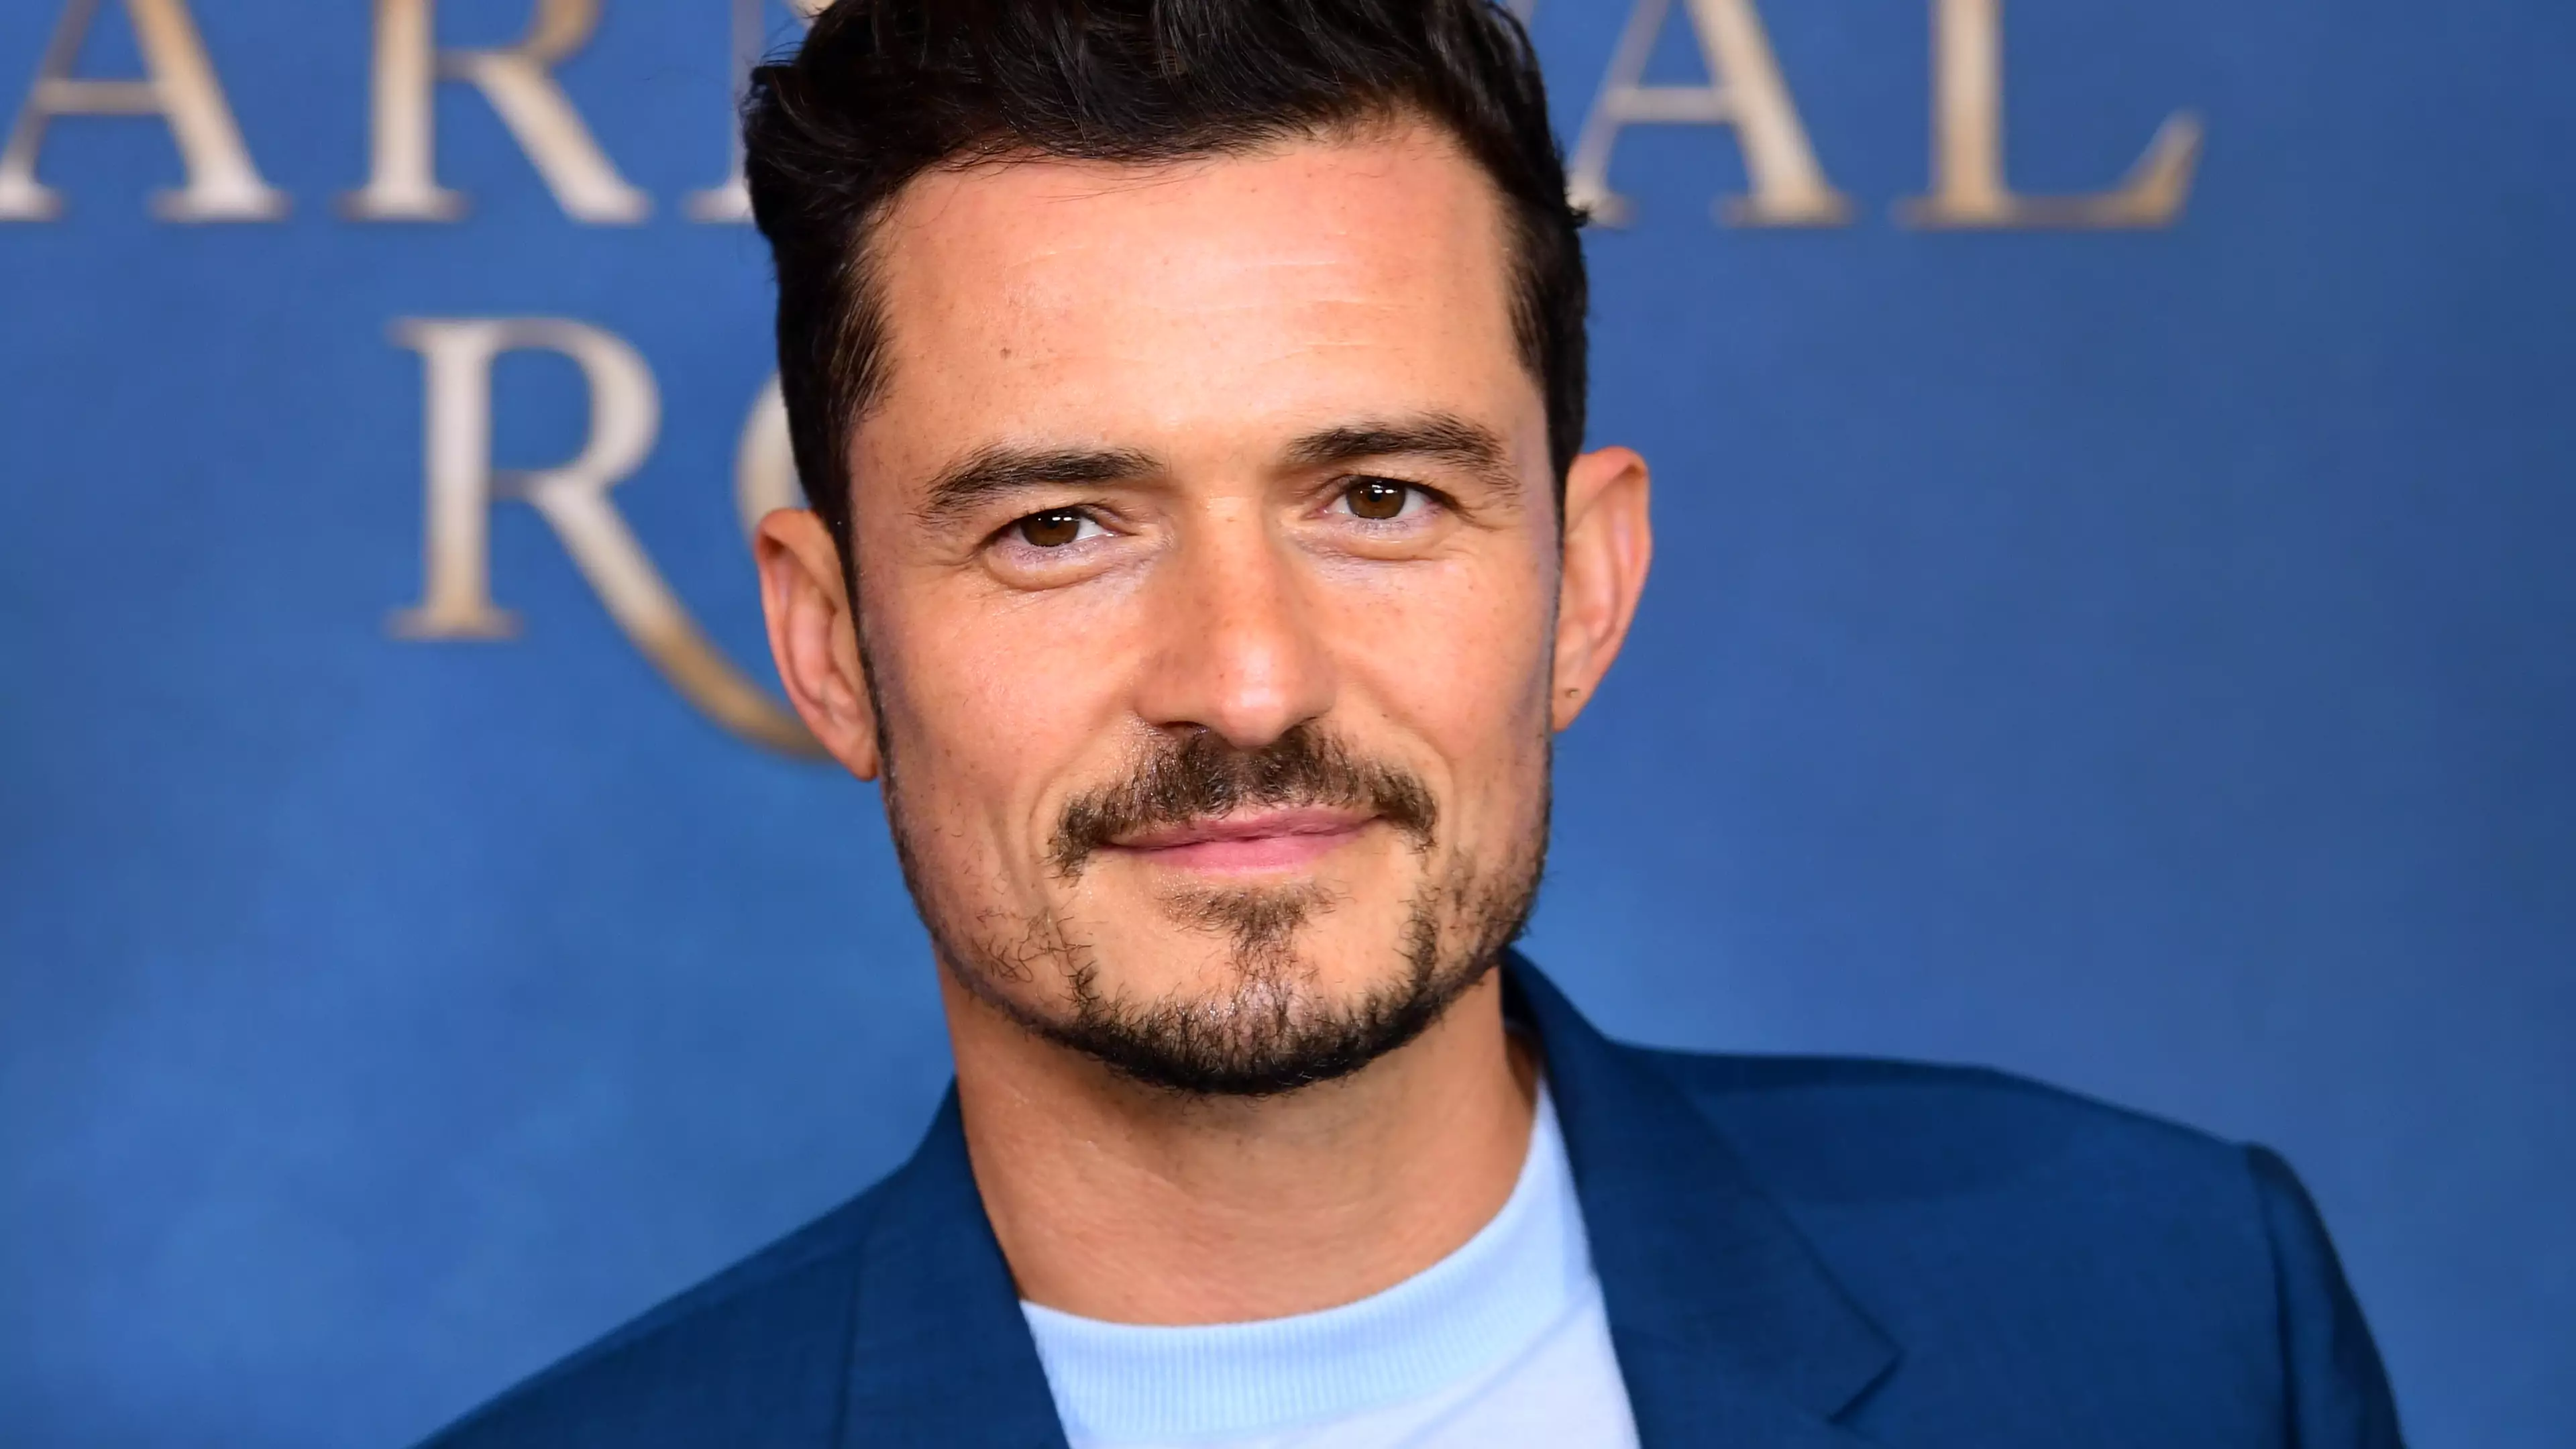 Orlando Bloom Breaks Silence On Those Paddle-Board Pictures 